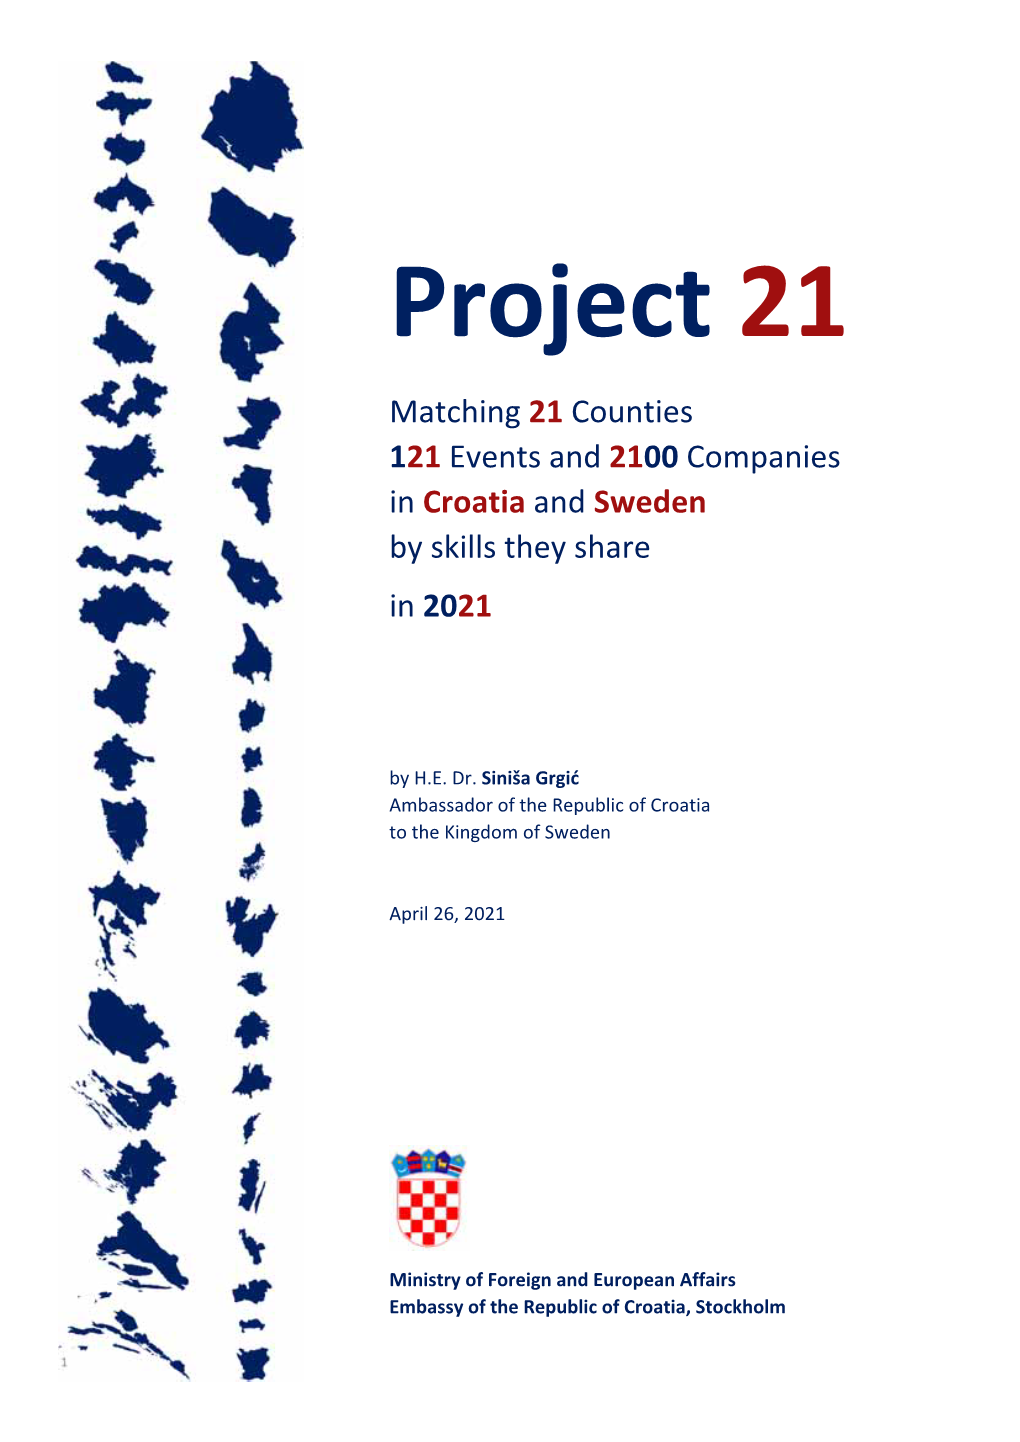 Project 21 Matching 21 Counties 121 Events and 2100 Companies in Croatia and Sweden by Skills They Share in 2021